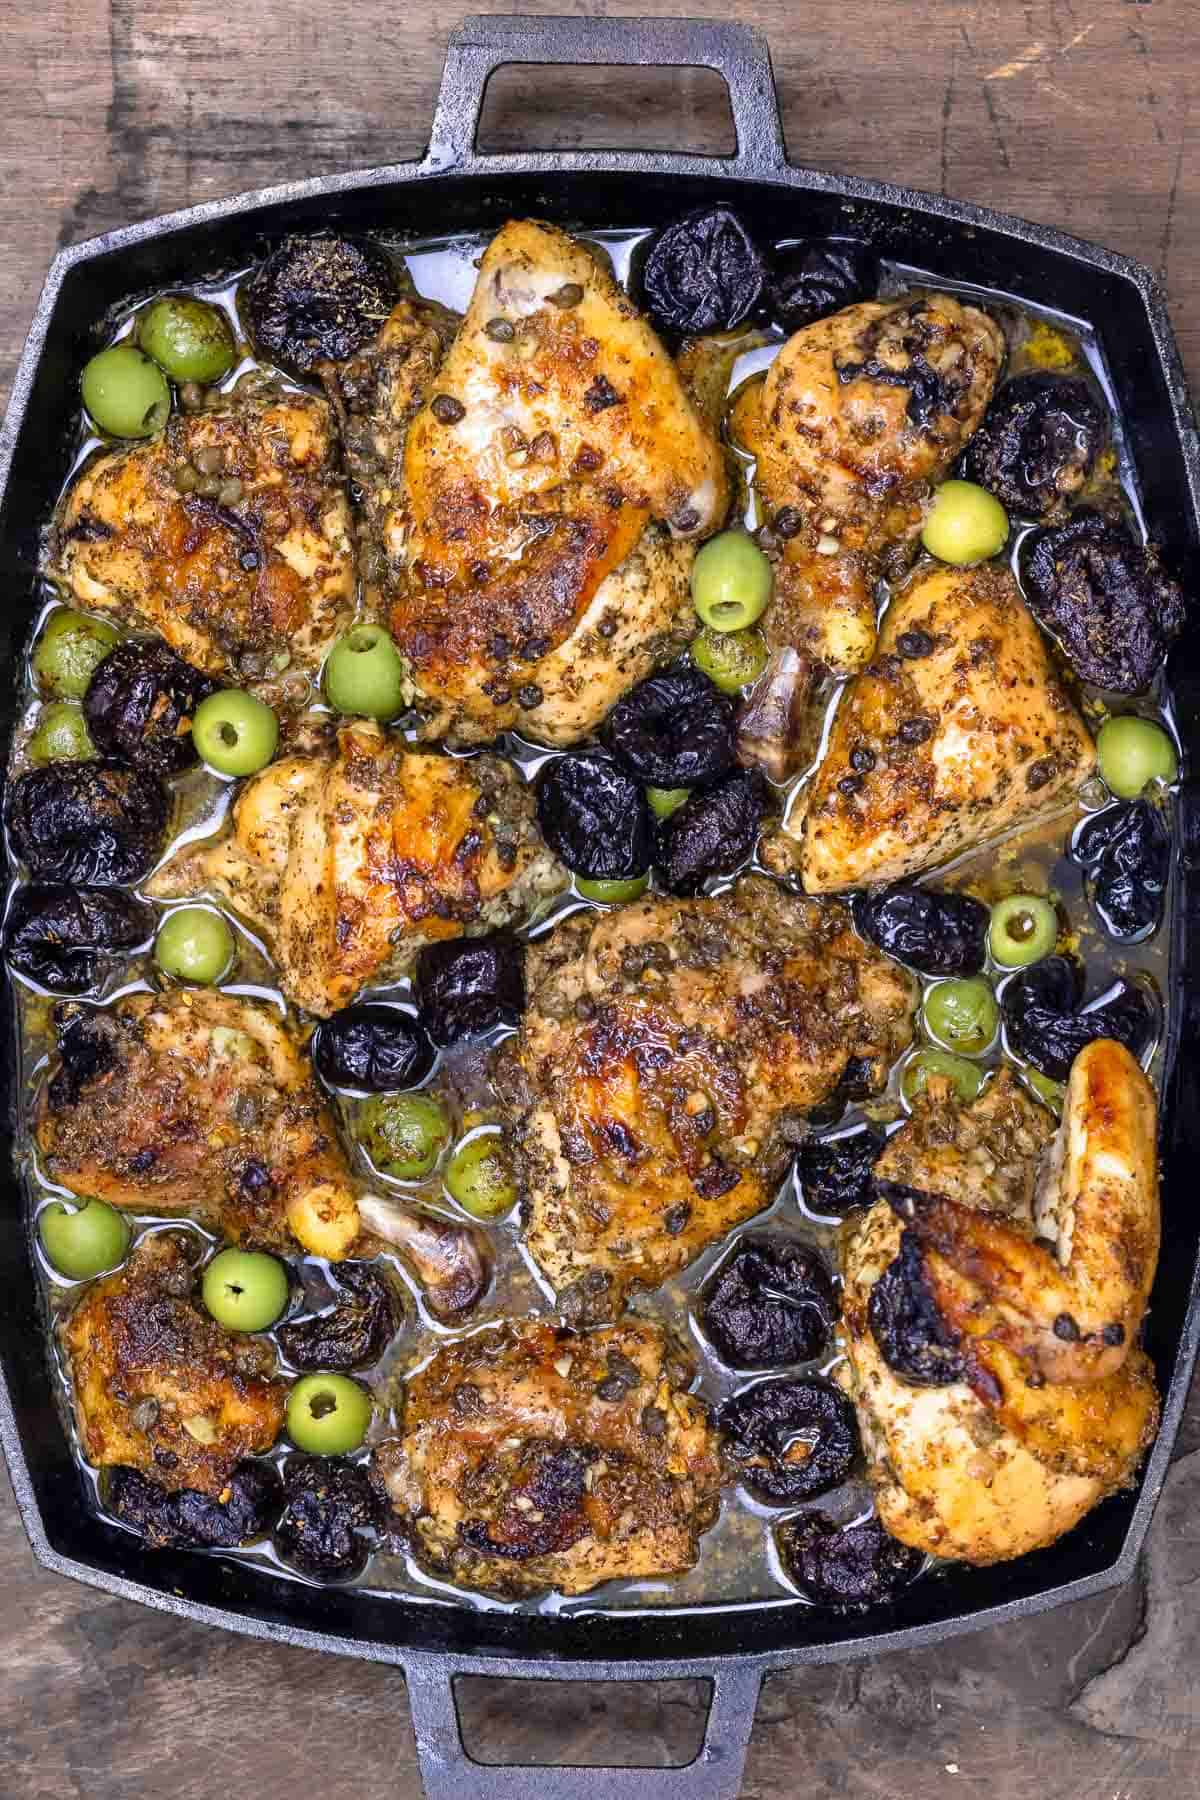 chicken marbella with a whole chicken, prunes, olives, and more.